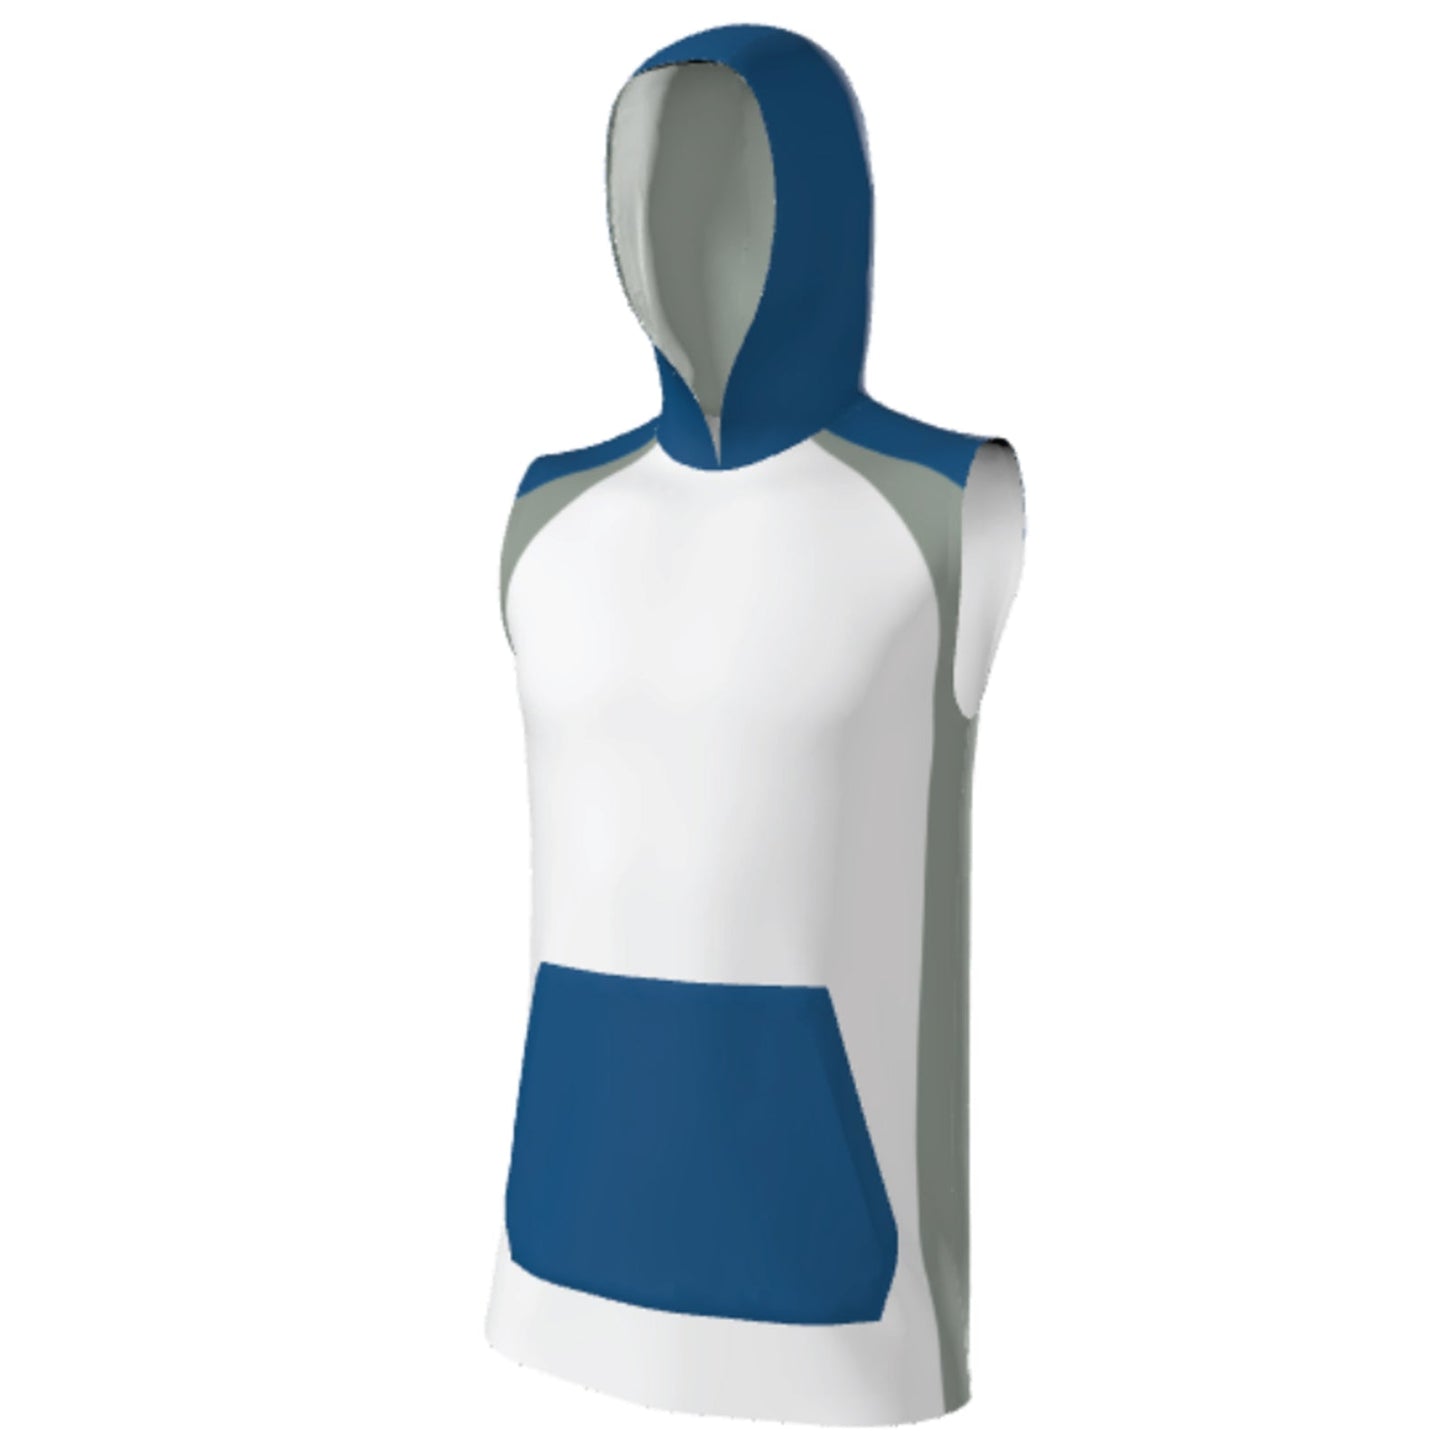 JUICE SUBLIMATED SLEEVELESS T-SHIRT HOODIE WITH POCKET - Select